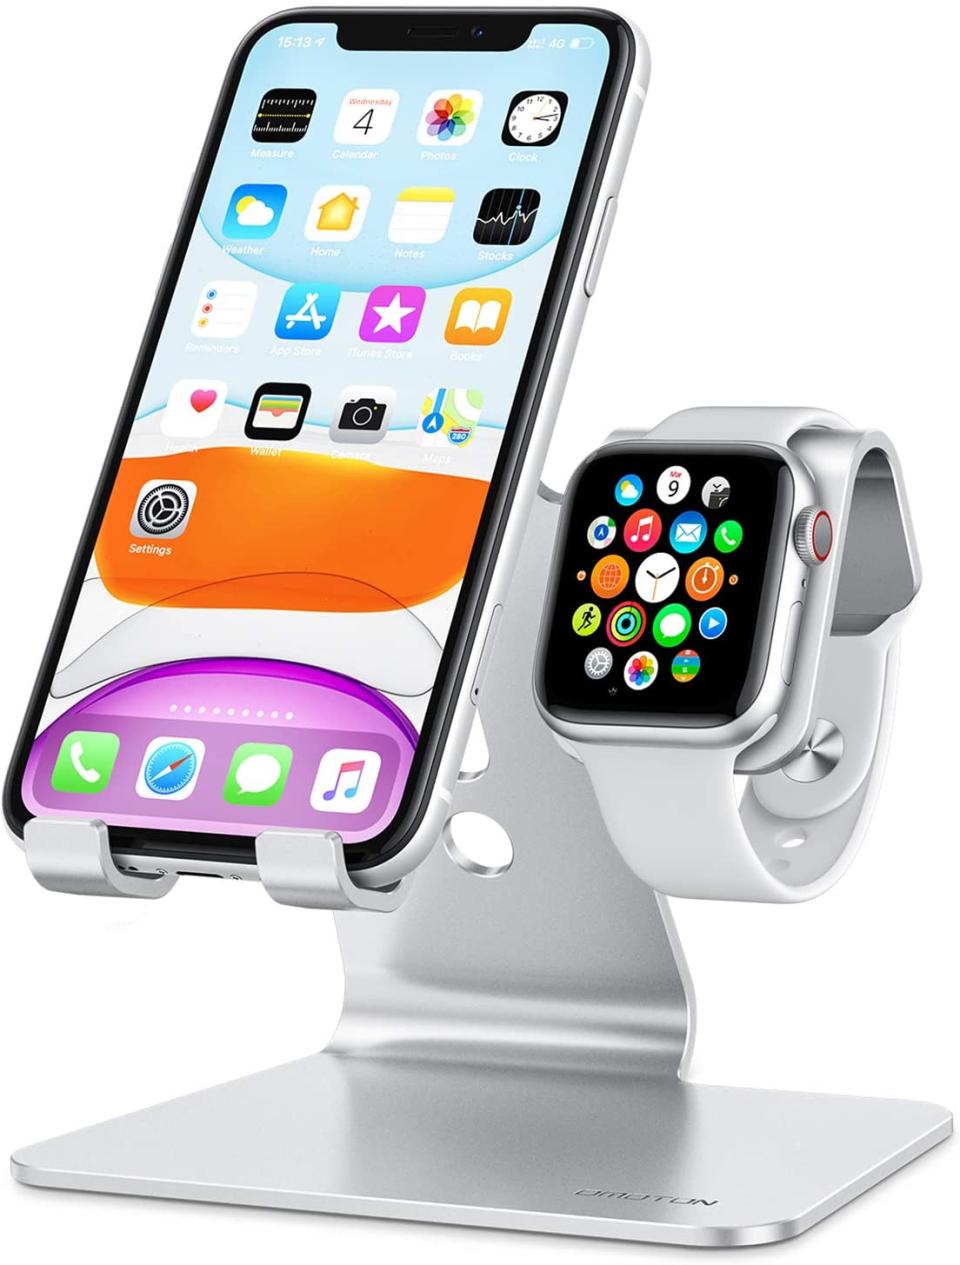 Apple Watch Accessories for sale on Amazon